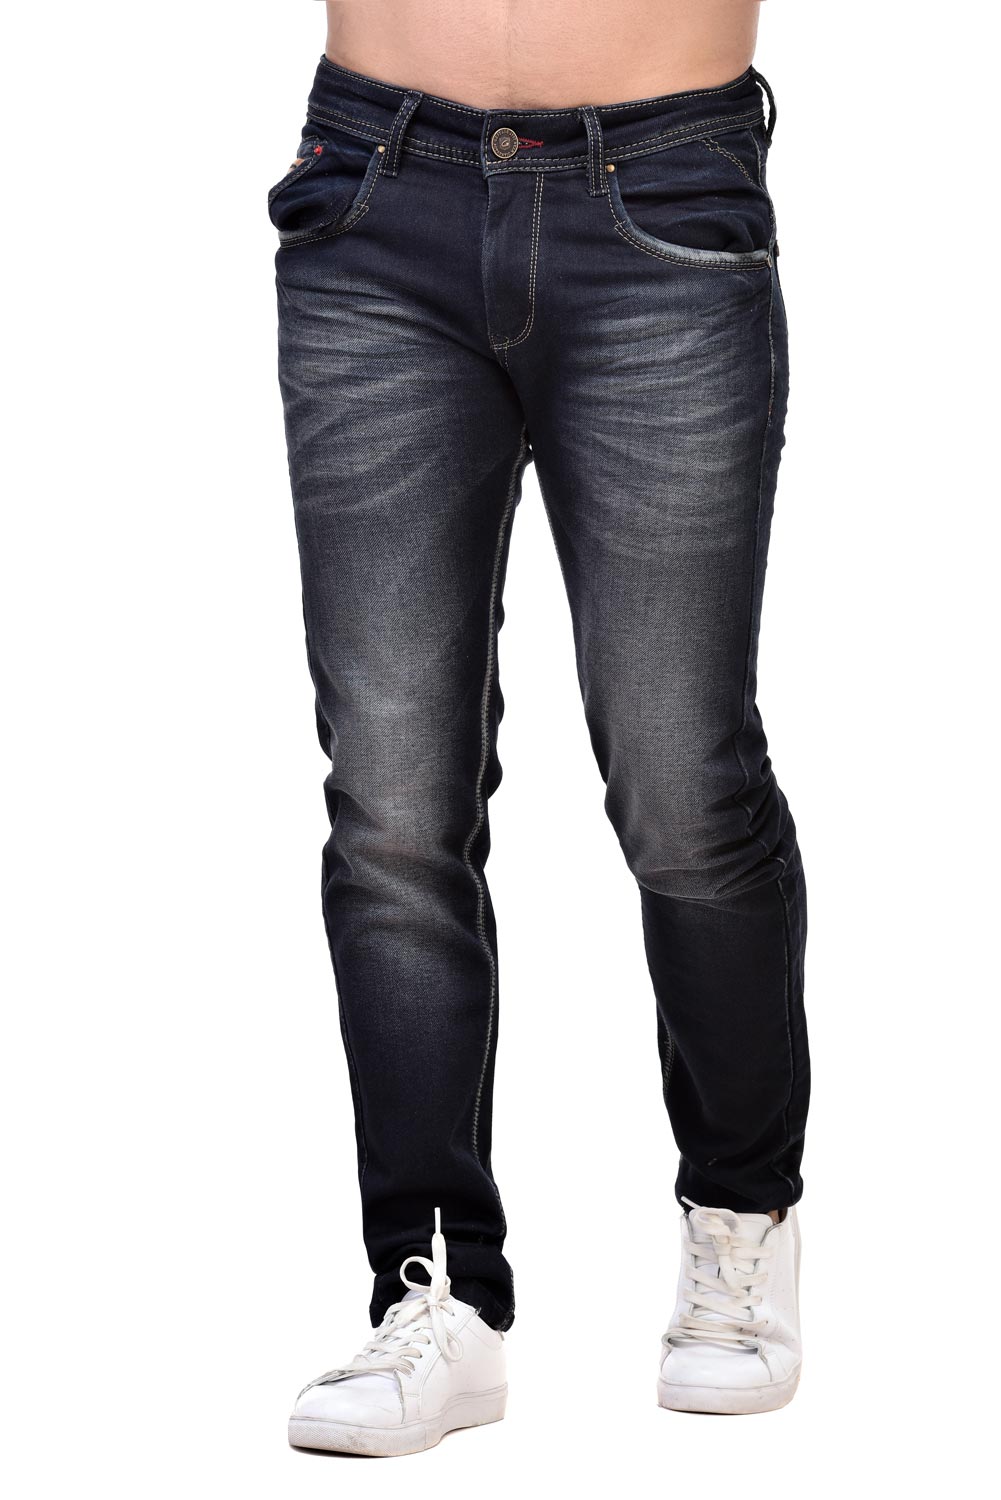 Men Blue Lagoon Narrow Fit Mid- Rise Stretchable Jeans - Gesture Jeans